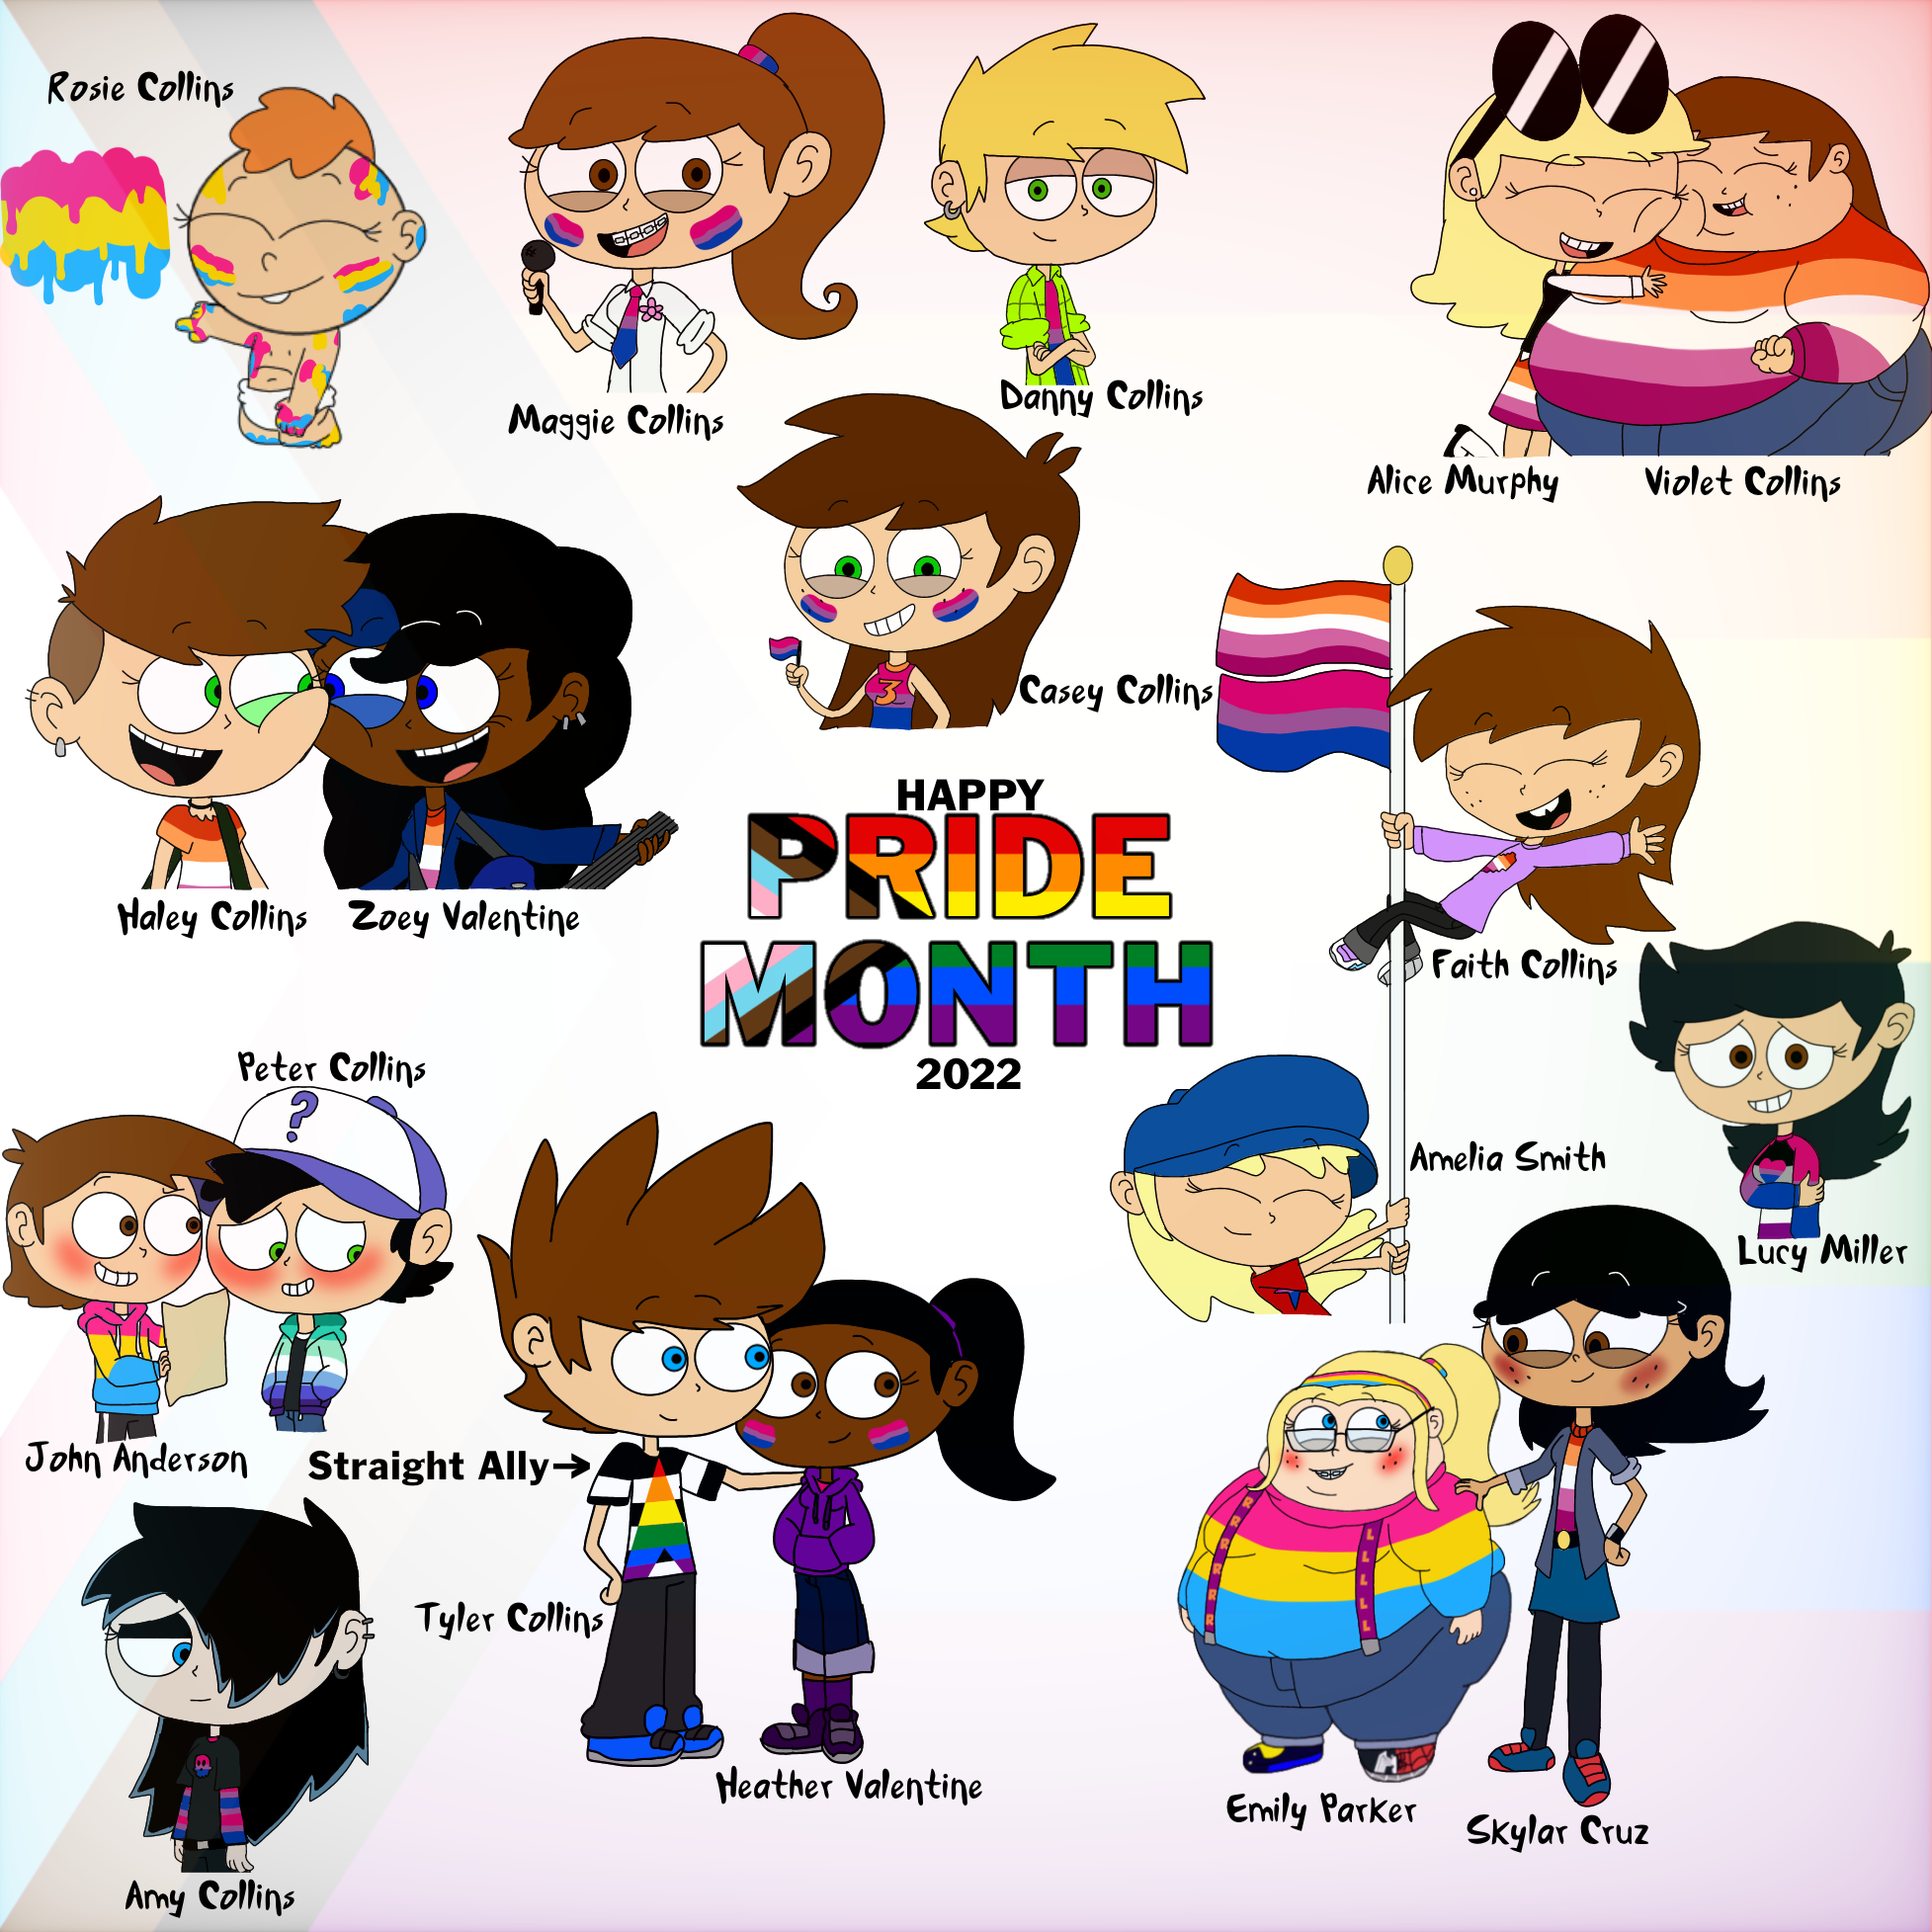 Happy pride month* from Lord x and his guardians by lordxlover on DeviantArt